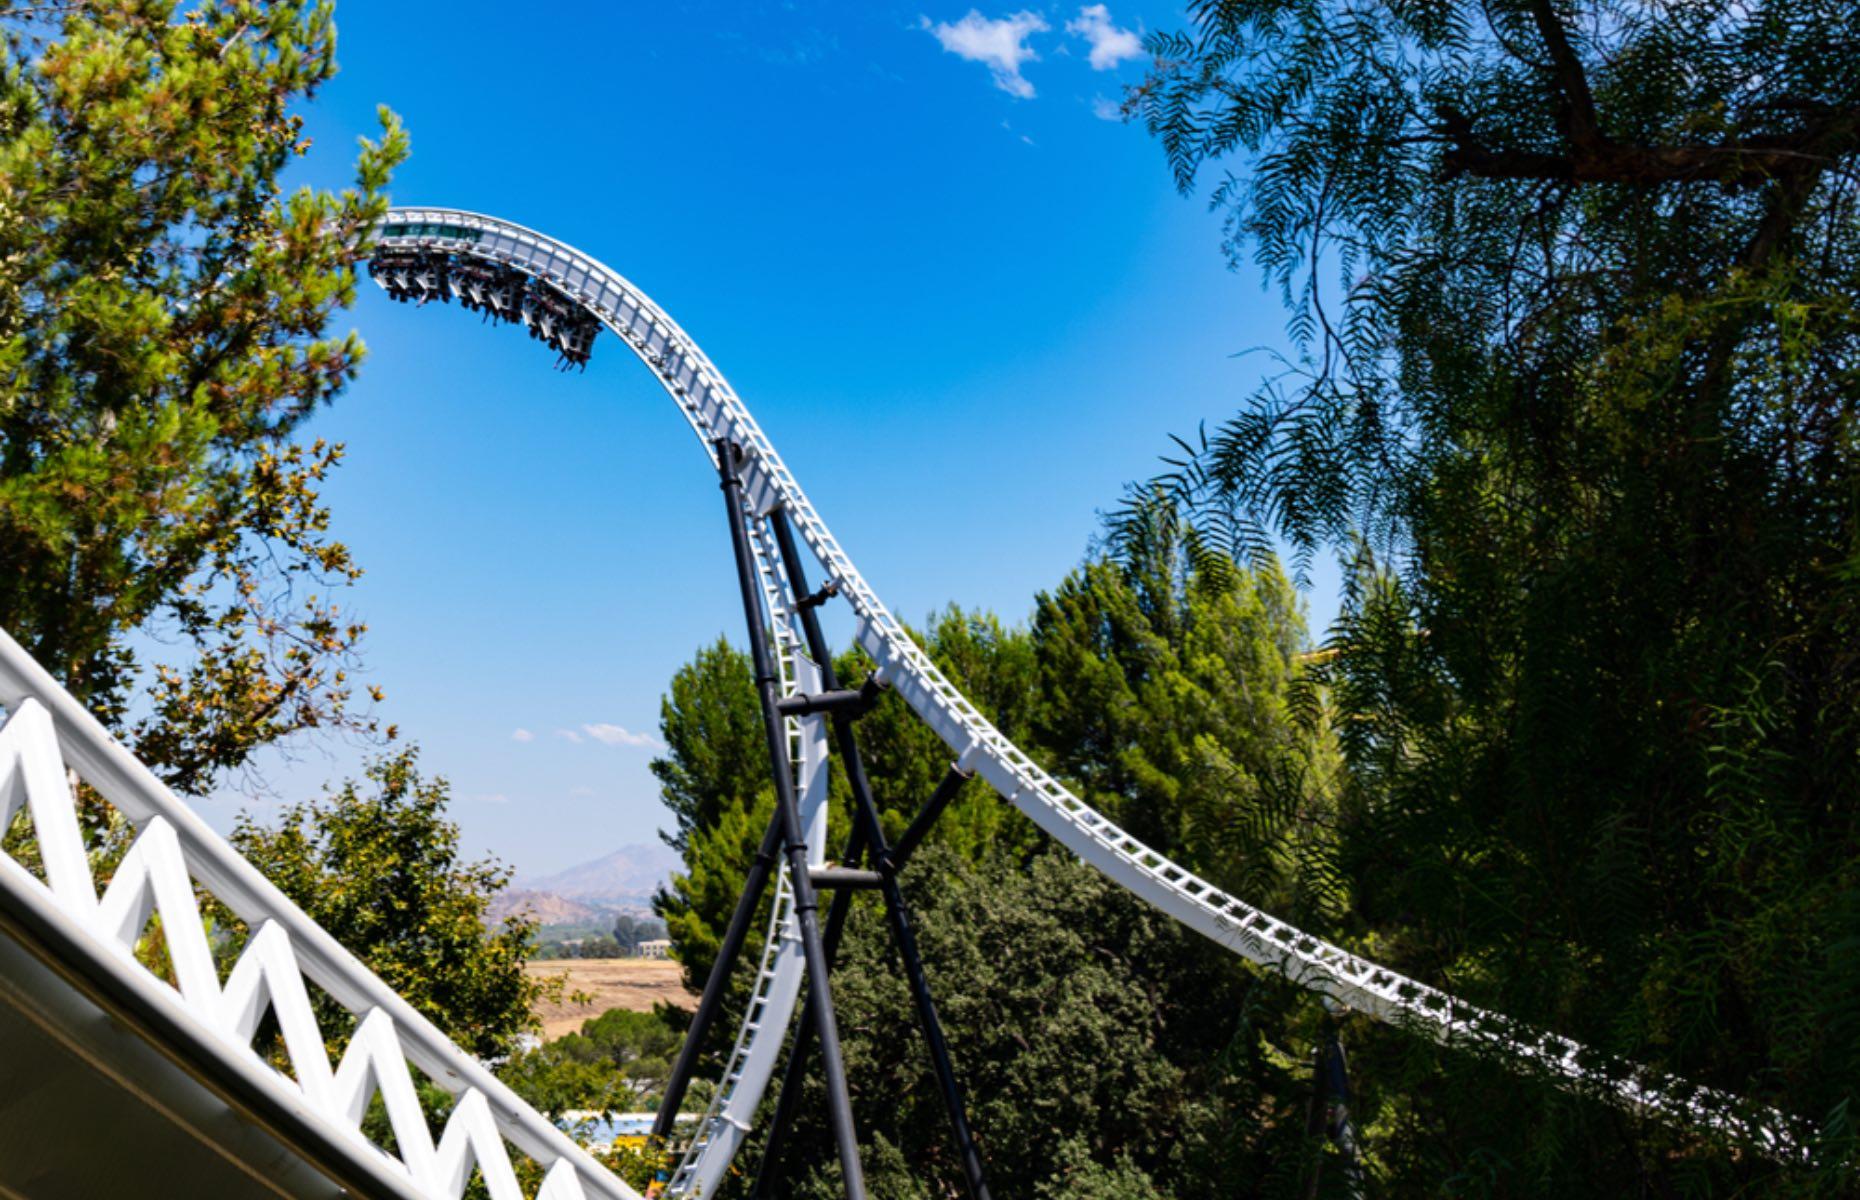 <p>Setting world records since it launched in 2013, Full Throttle is as unique as it is scary. It has the tallest vertical loop in the world, and at 160 feet it's the only coaster in the world to have a track on the outside of the loop.</p>  <p>Full Throttle also features three separate 70-mile-per-hour launches. One, in particular, propels riders backward around the massive loop, stops midway, switches direction mid-loop, and dives back into a tunnel towards the 'top hat' (the outside of the track).</p>